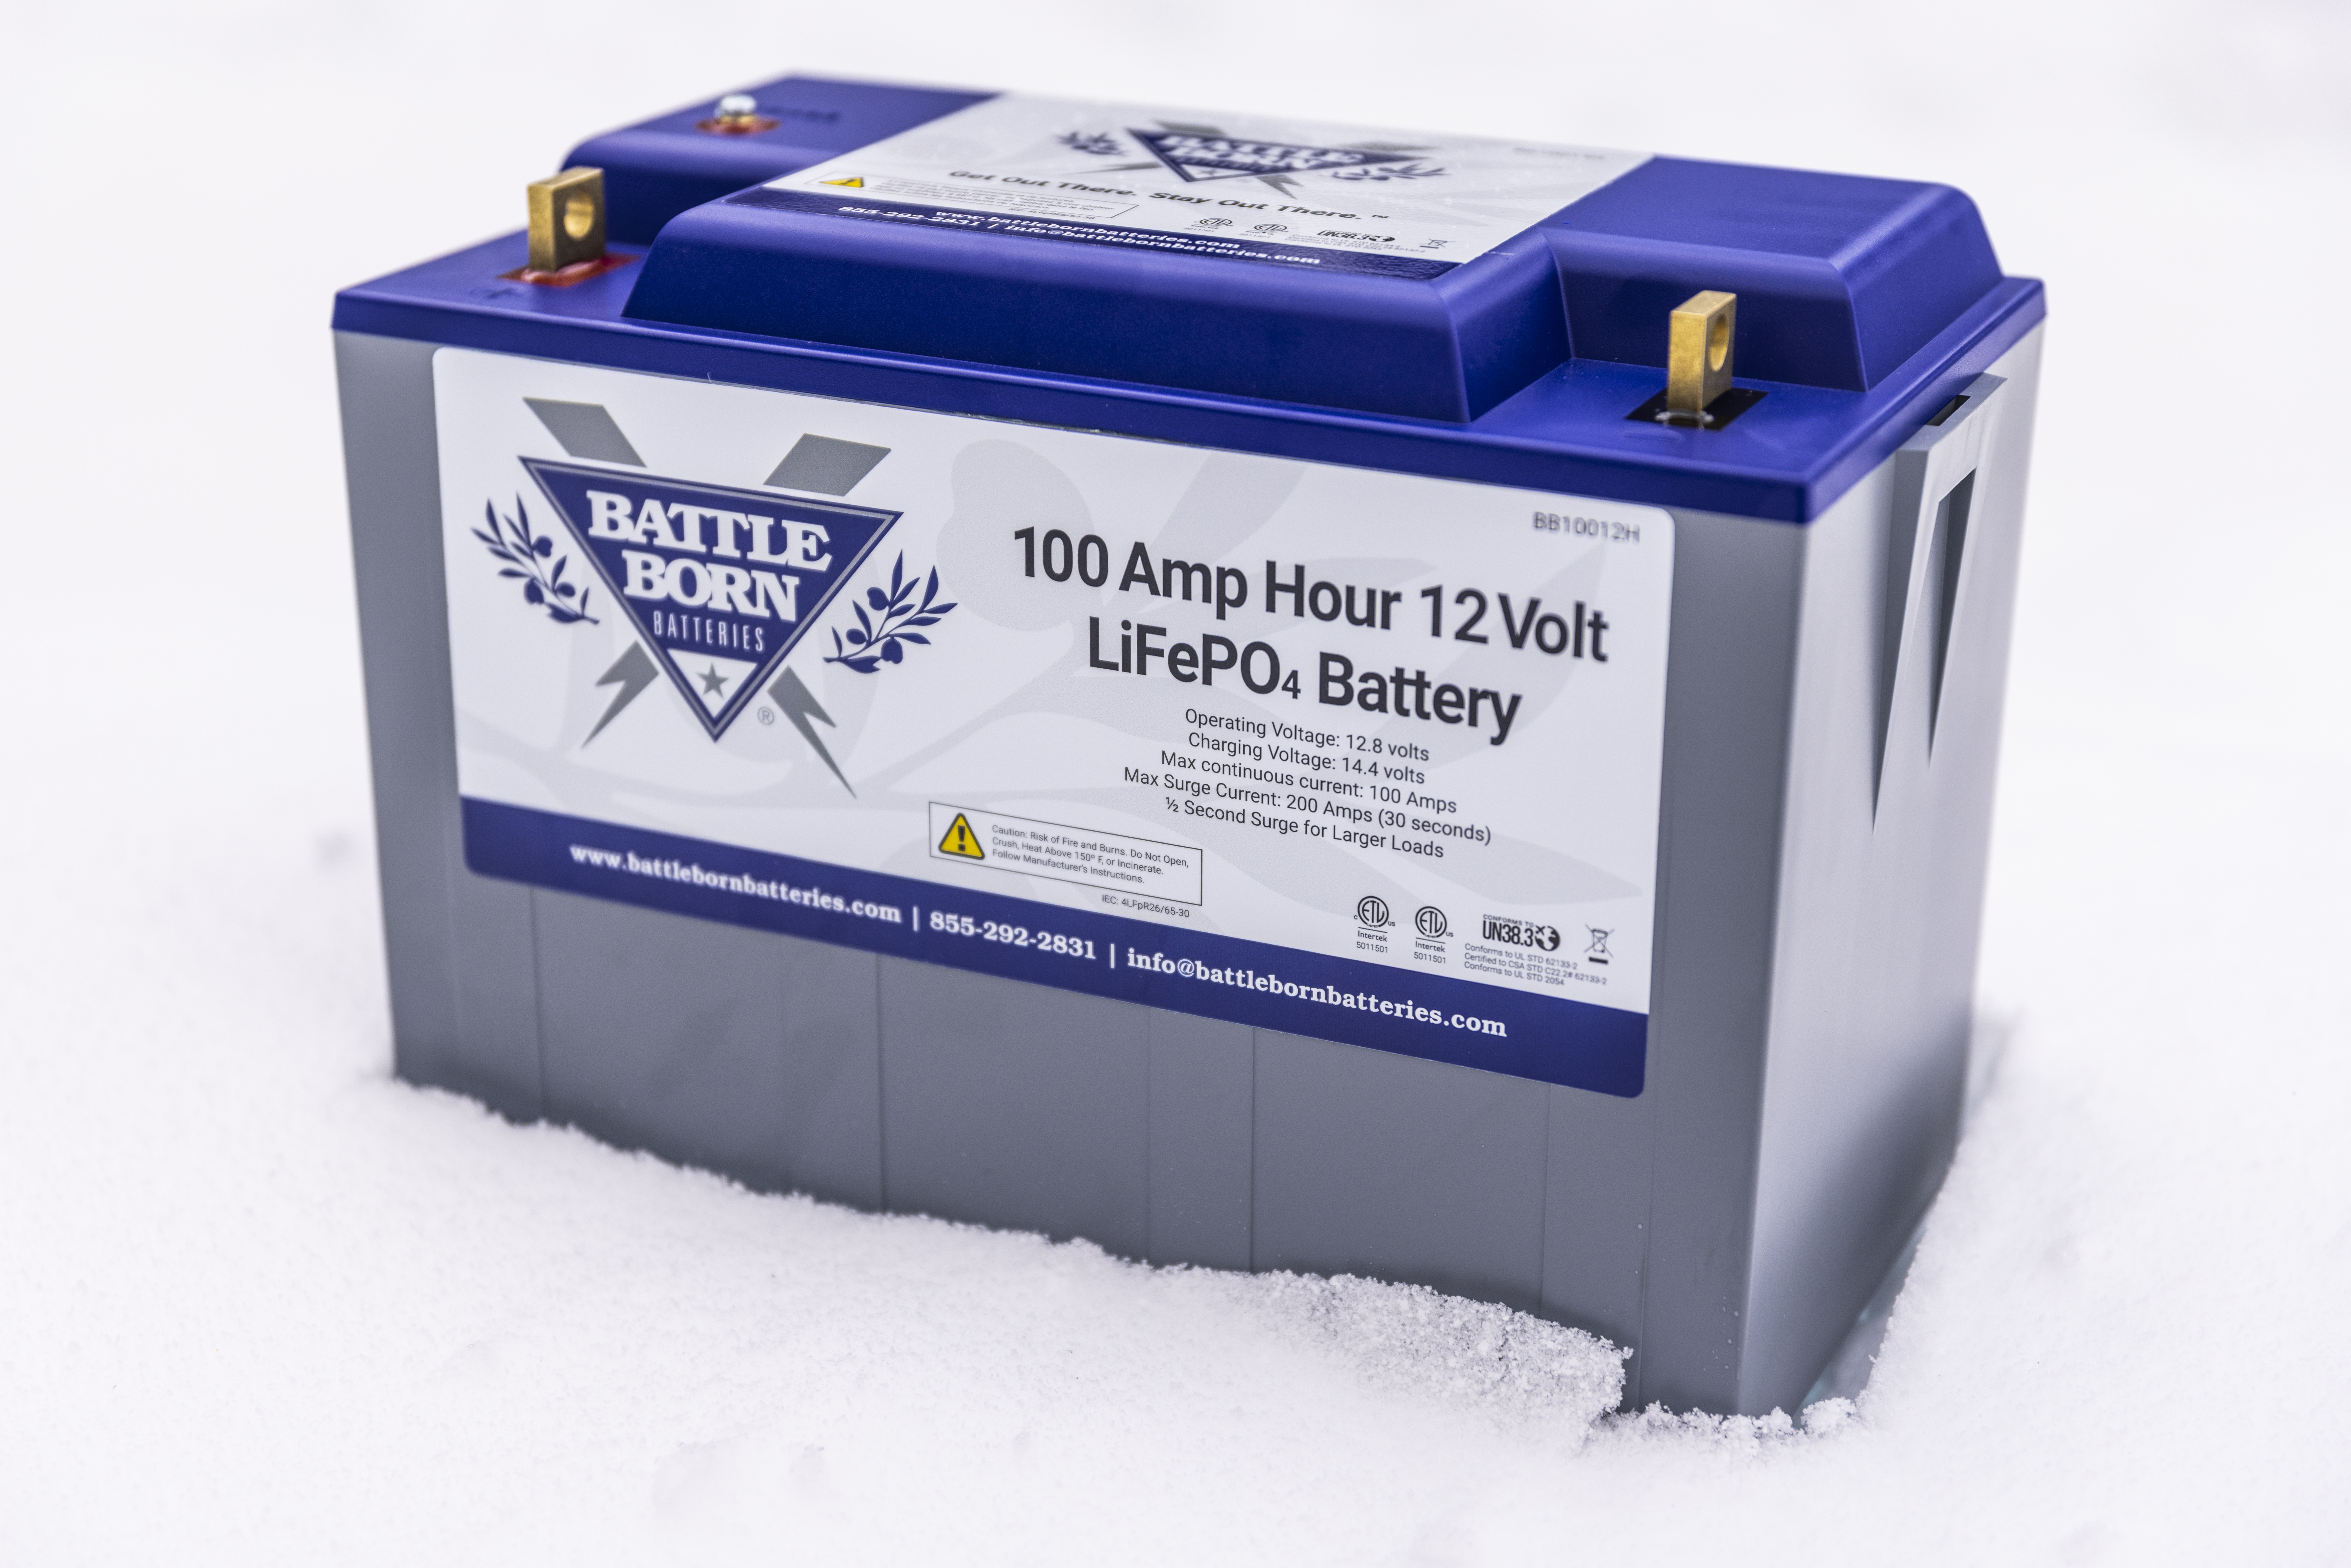 Battle Born Batteries in the Snow